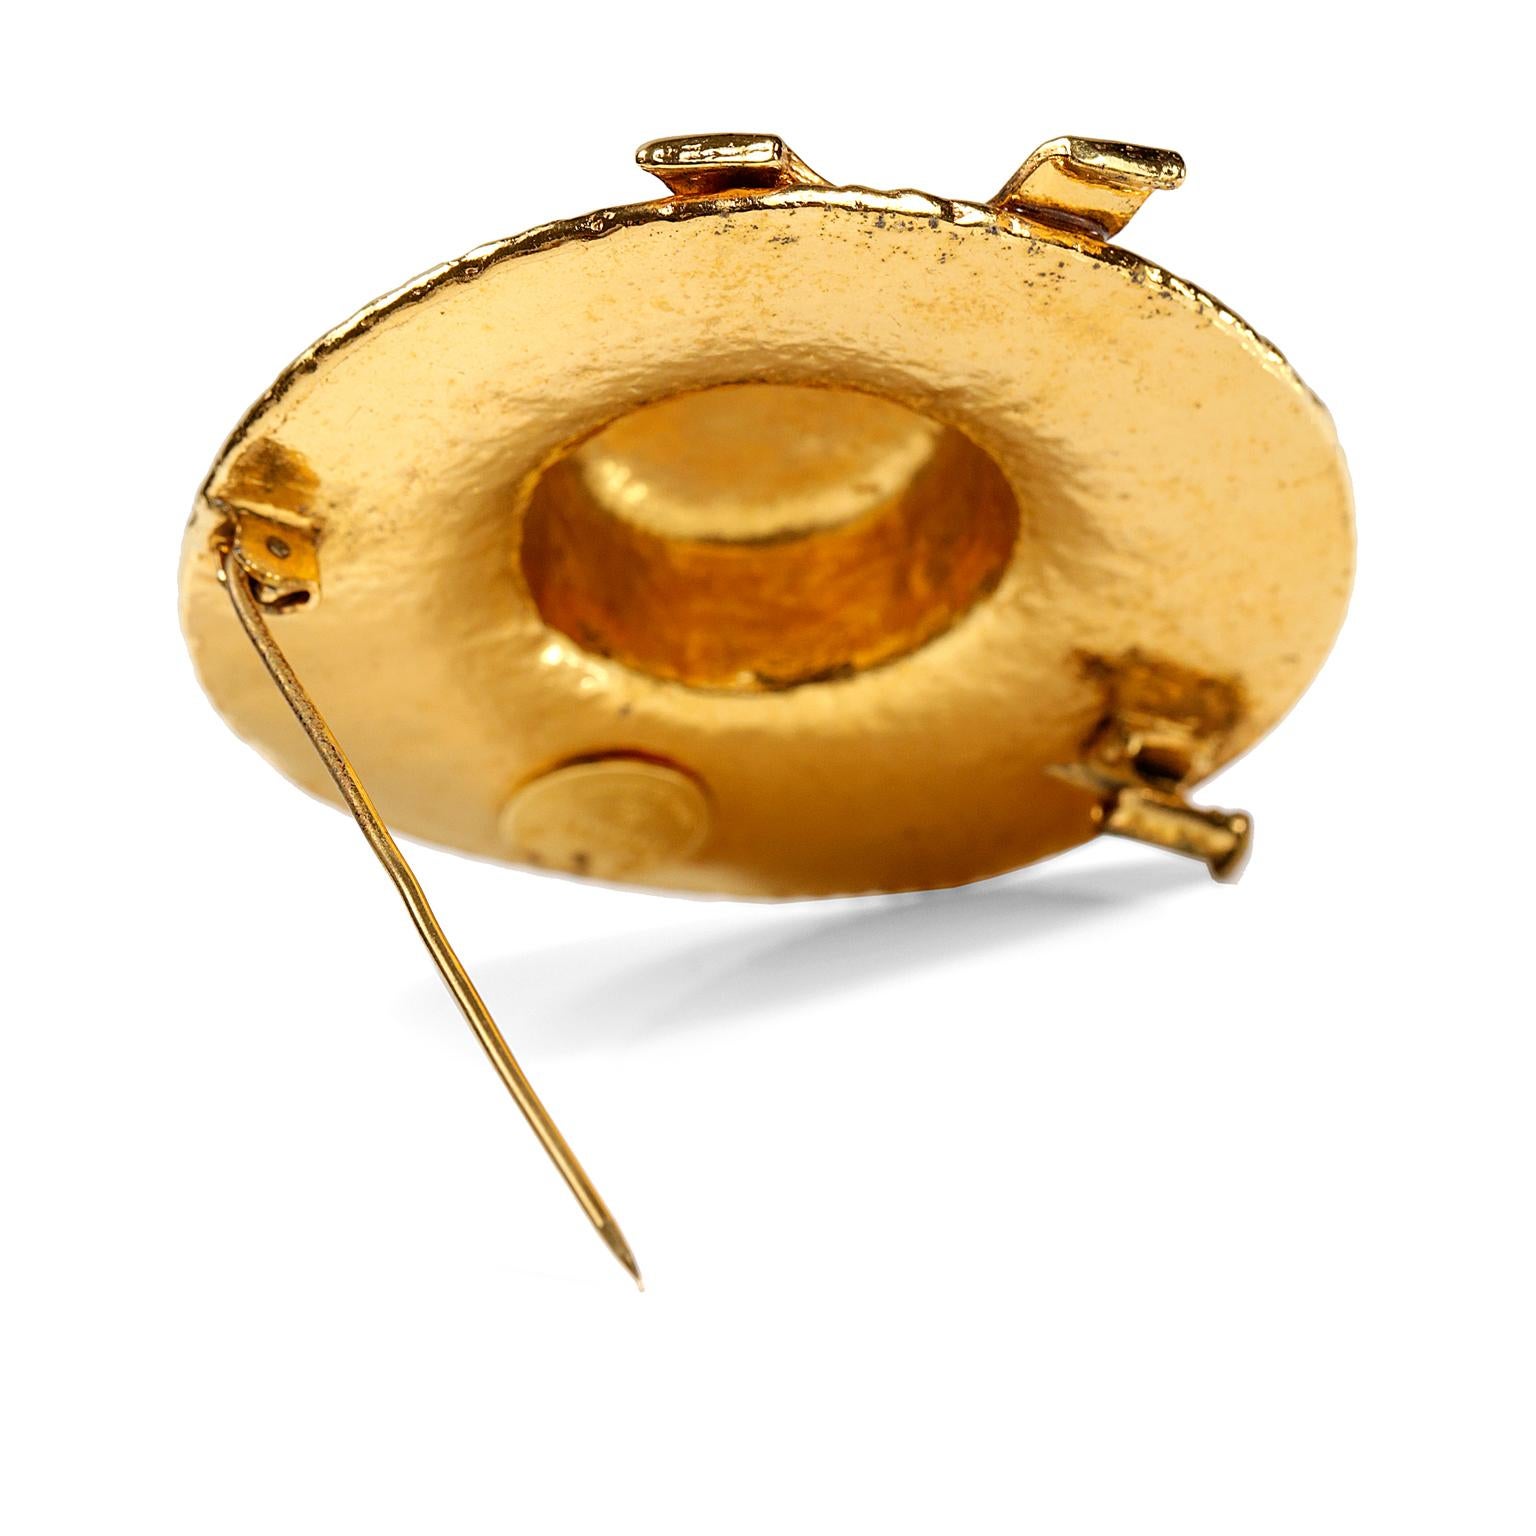 Chanel Gold Vintage Hat Pin is in excellent condition.  A charming whimsical piece for any collection. 

Gold tone straw hat with large bow.  Secures with a straight pin on the rear.  Made in France.  Approximately two inches.

A509